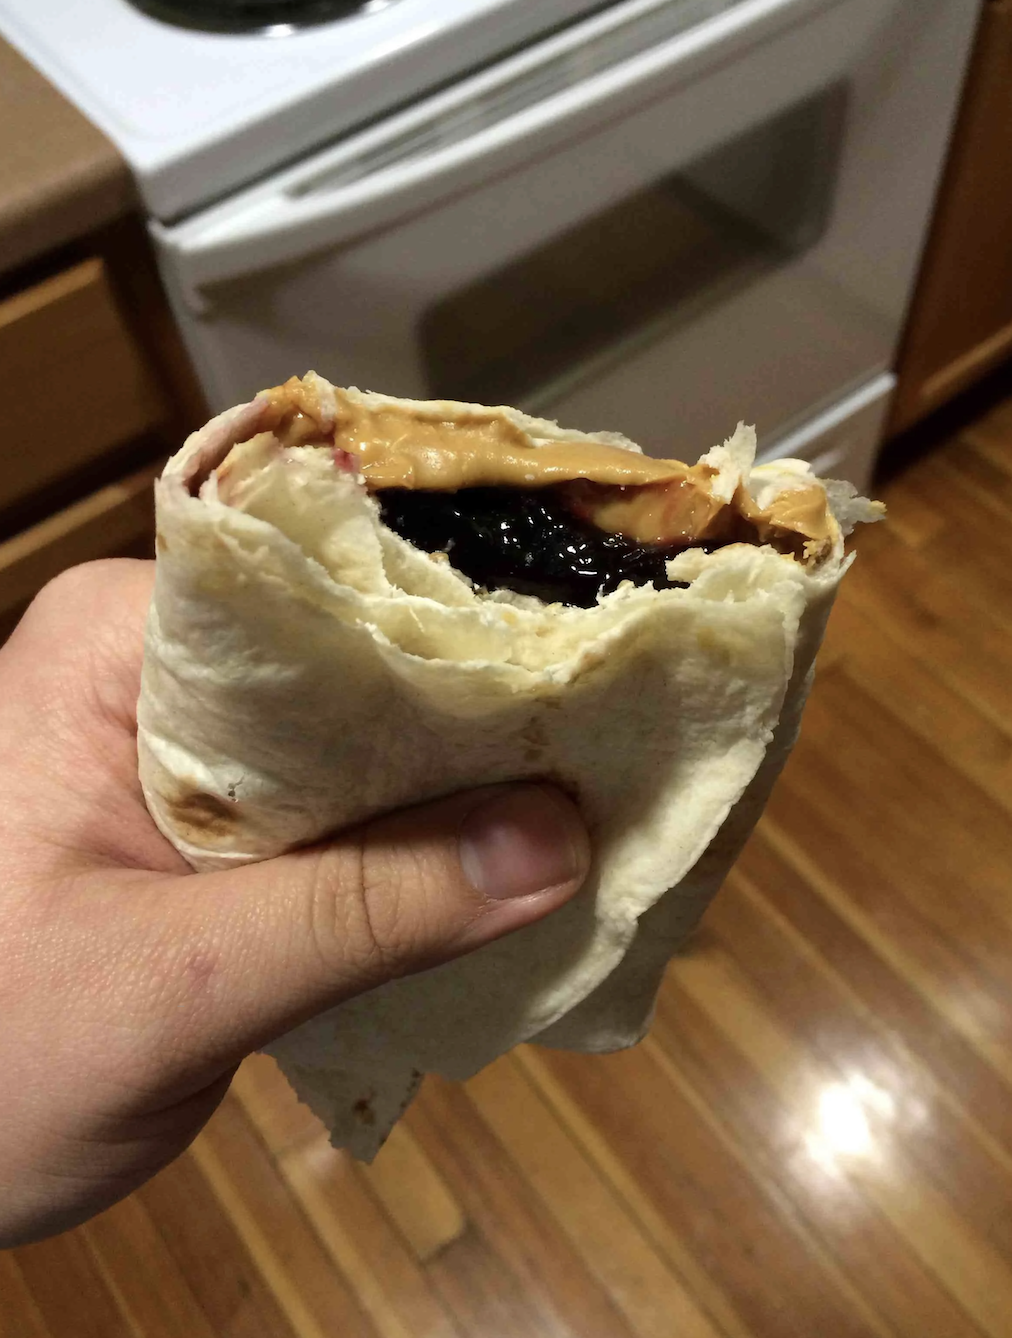 Person holding a half-eaten peanut butter and jelly sandwich wrapped in a tortilla